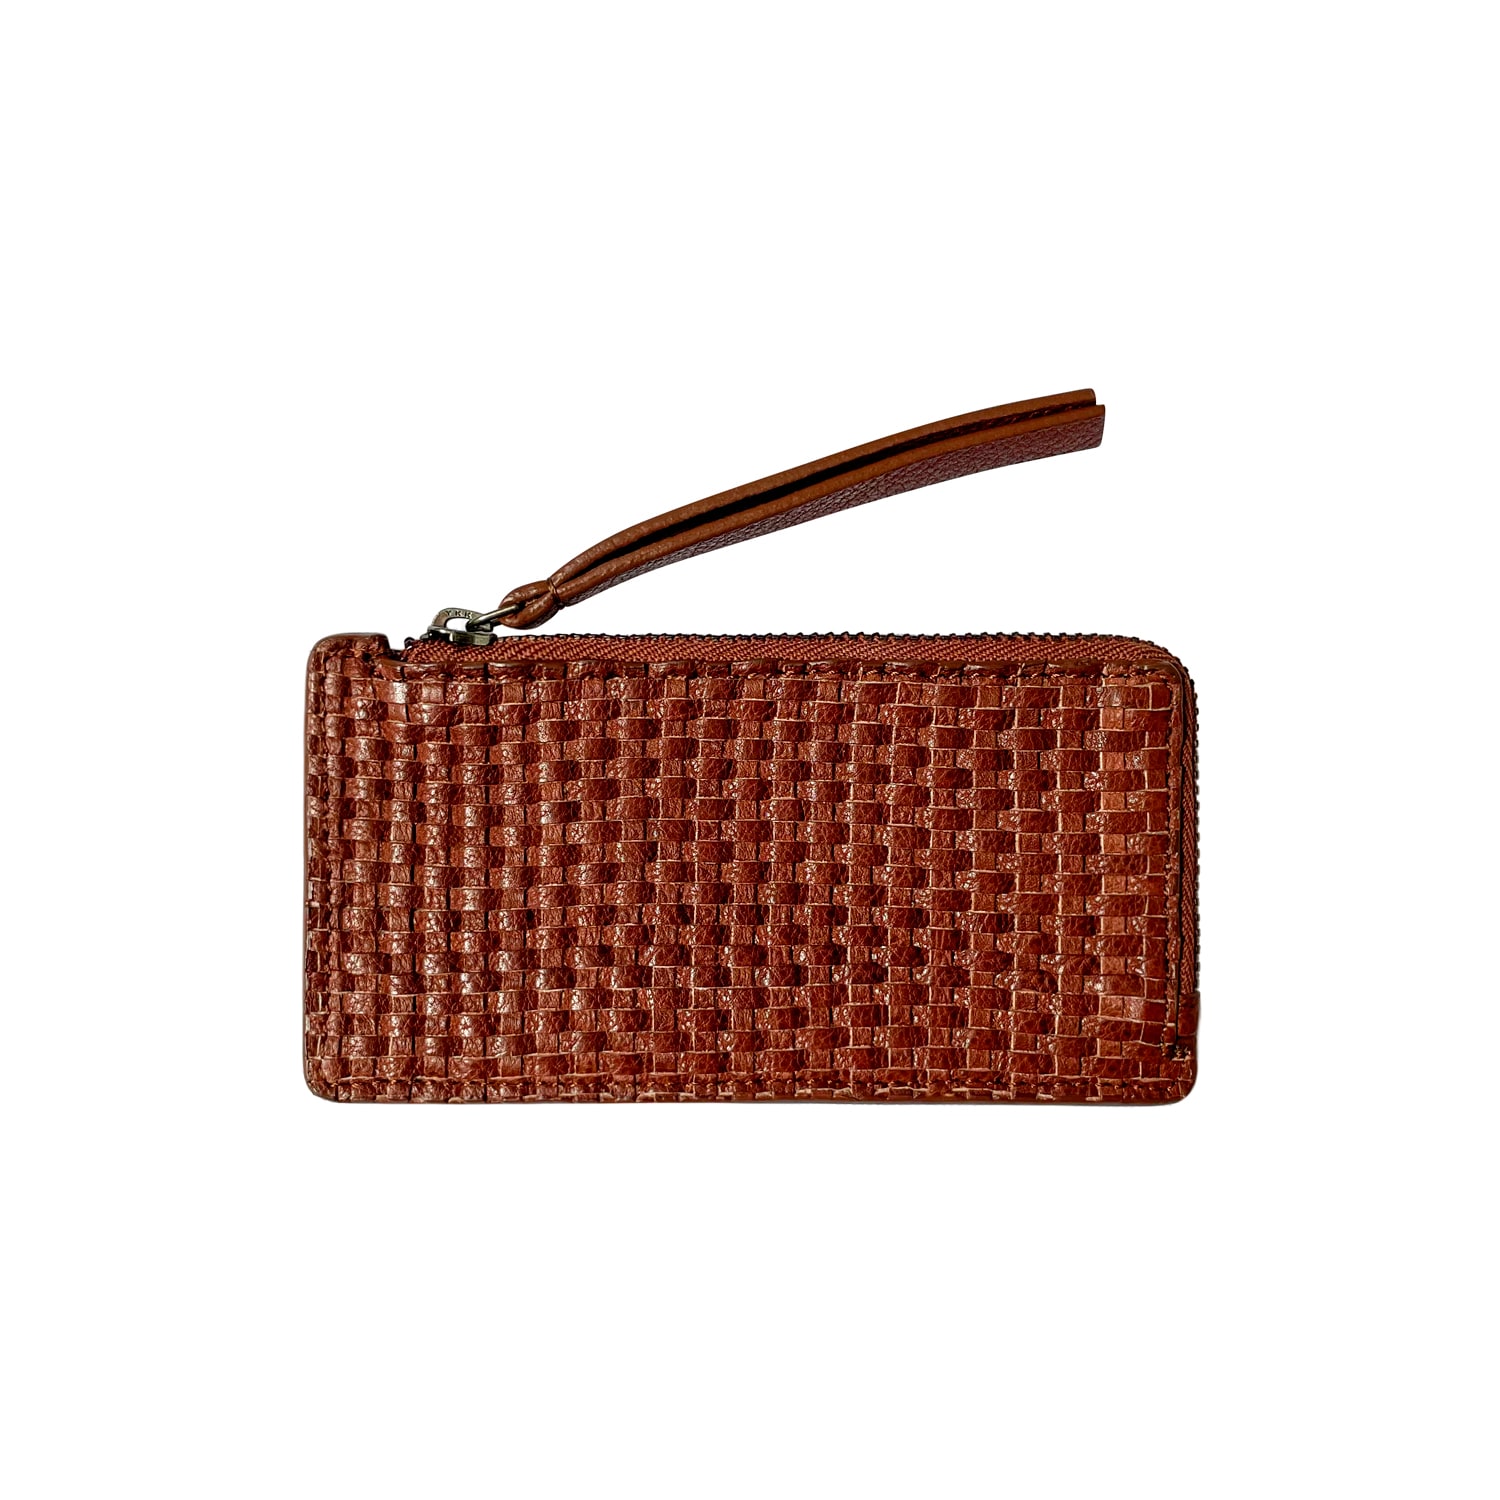 Atelier Du Sac Women's Ines Leather Card & Coin Holder Brown